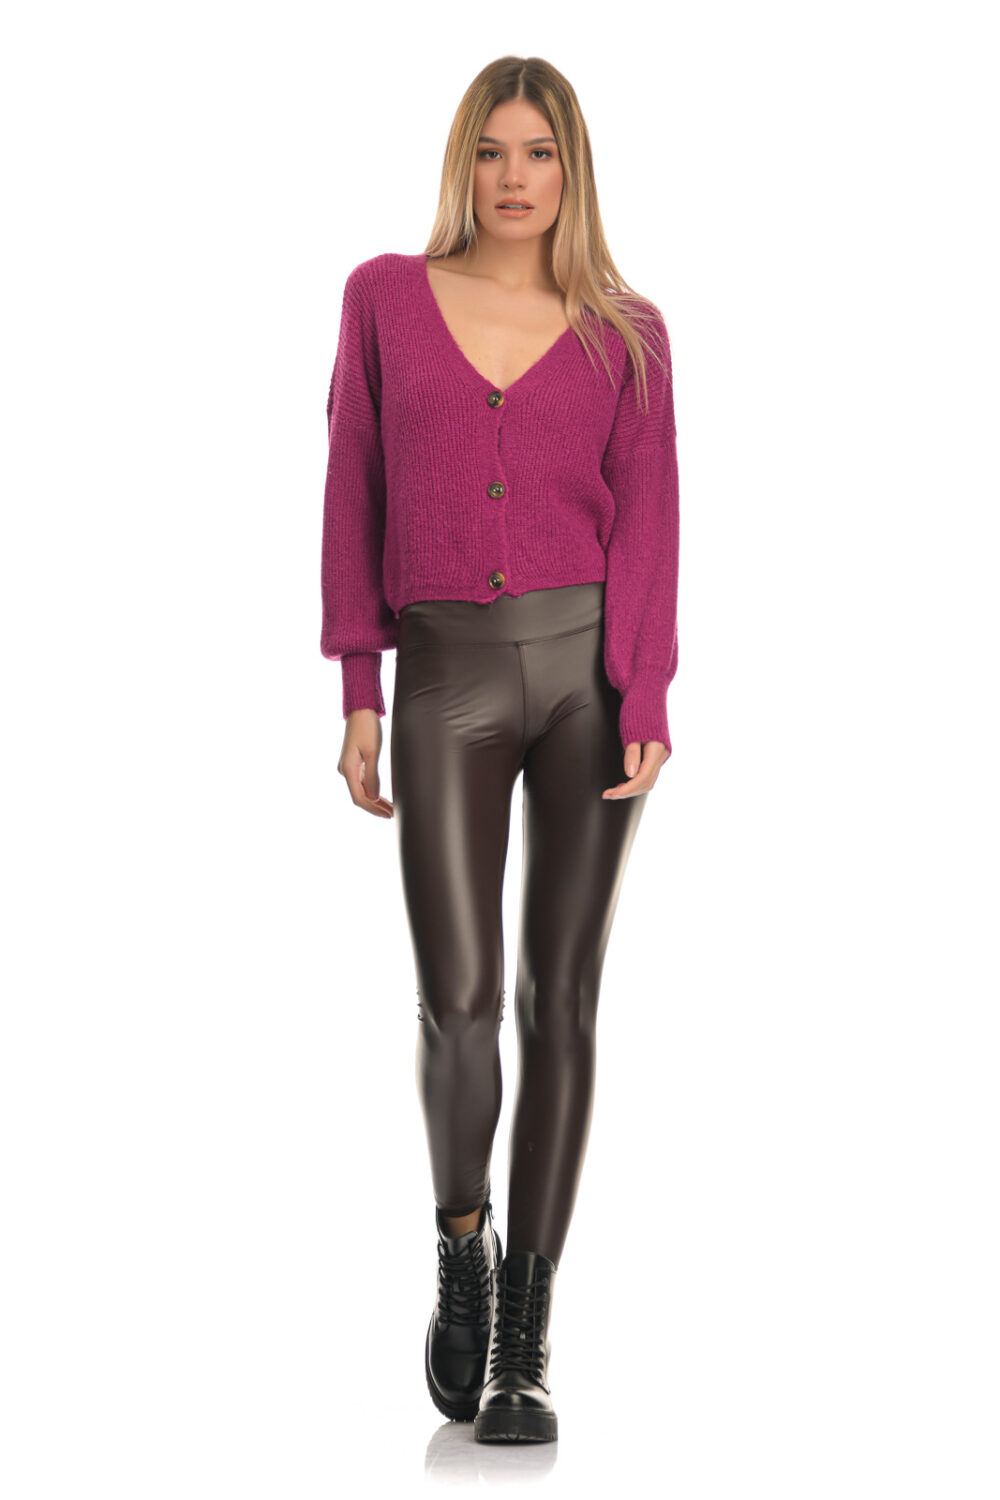 High-waisted brown leggings made of leatherette